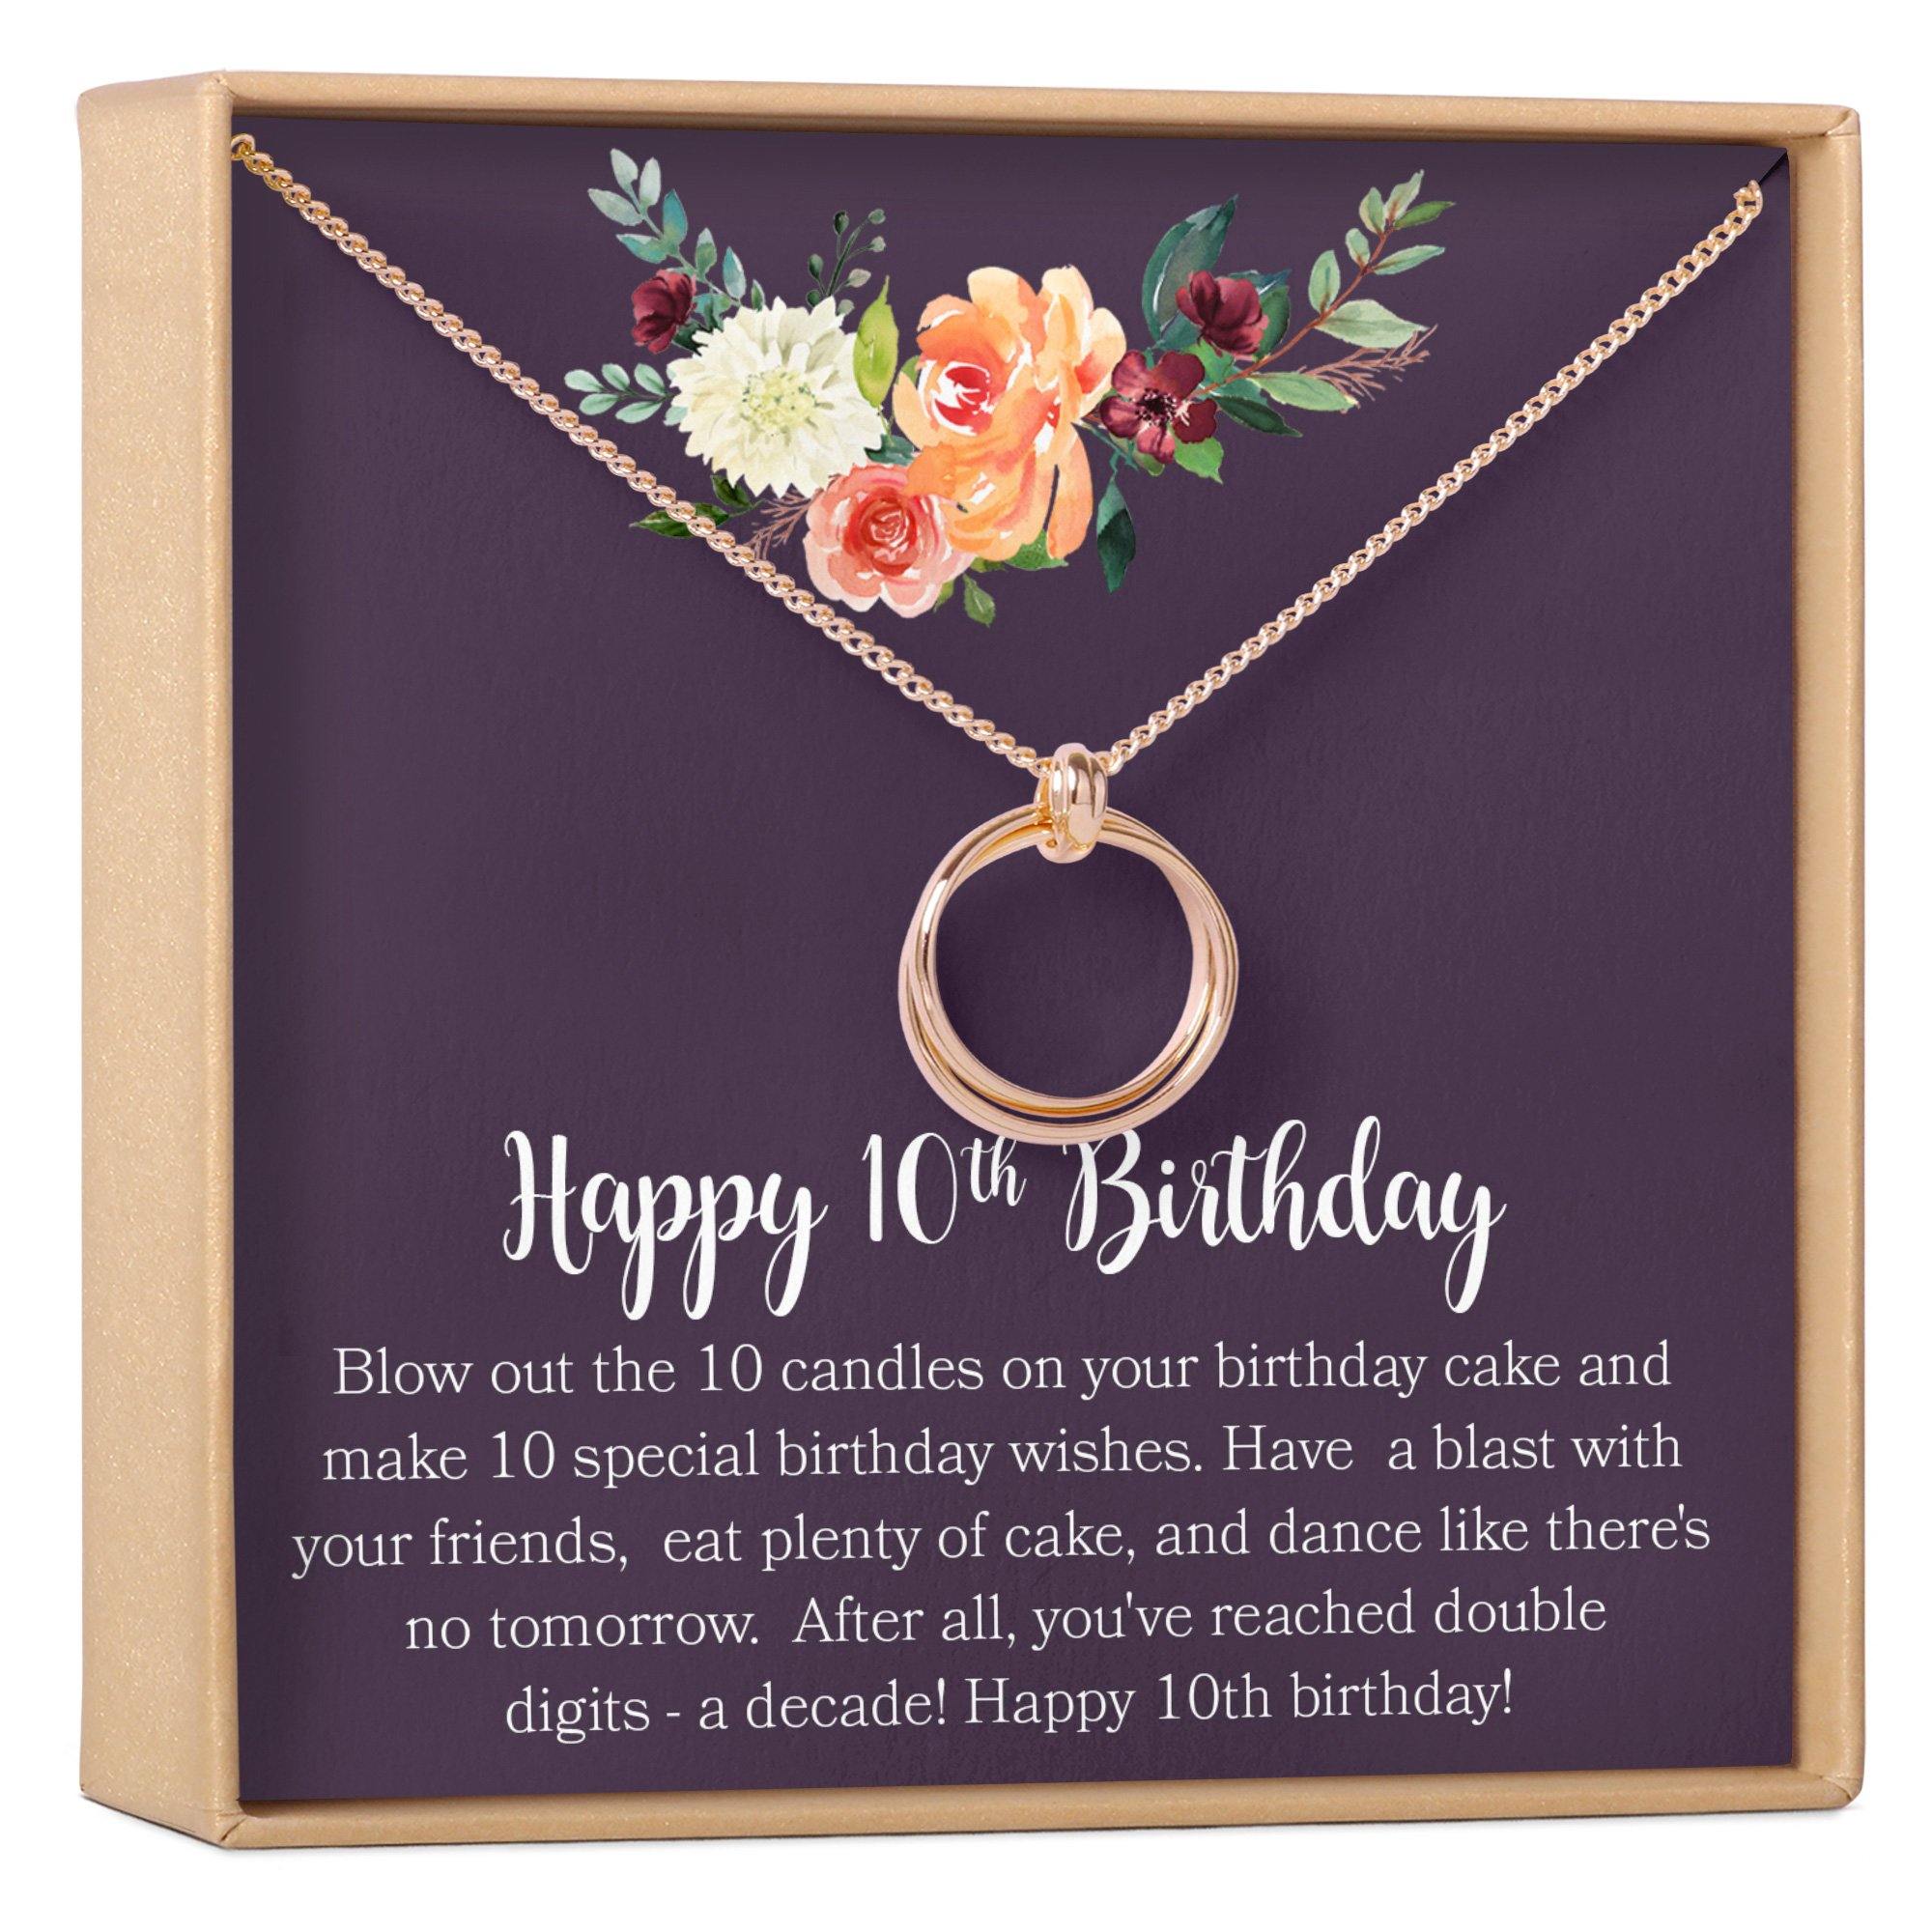 10th Birthday Girl, 10th Birthday Gift, Tenth Birthday Necklace, Gift for 10-Year-Old Girl Gifts, Double Digits Birthday, Silver